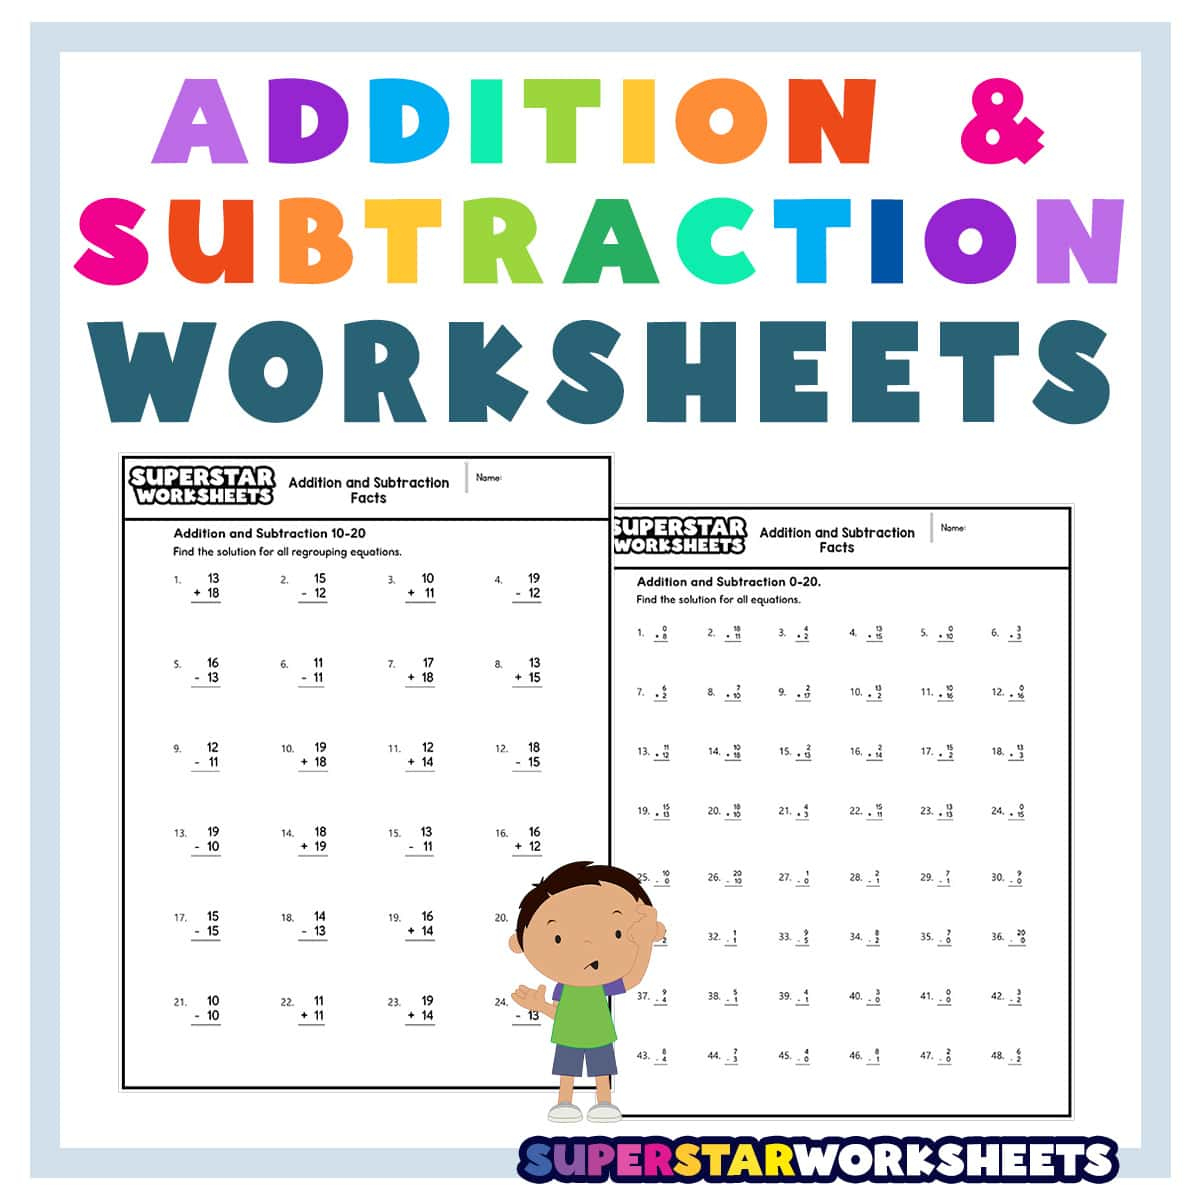 Addition And Subtraction Worksheets - Superstar Worksheets within Free Printable Addition And Subtraction Worksheets